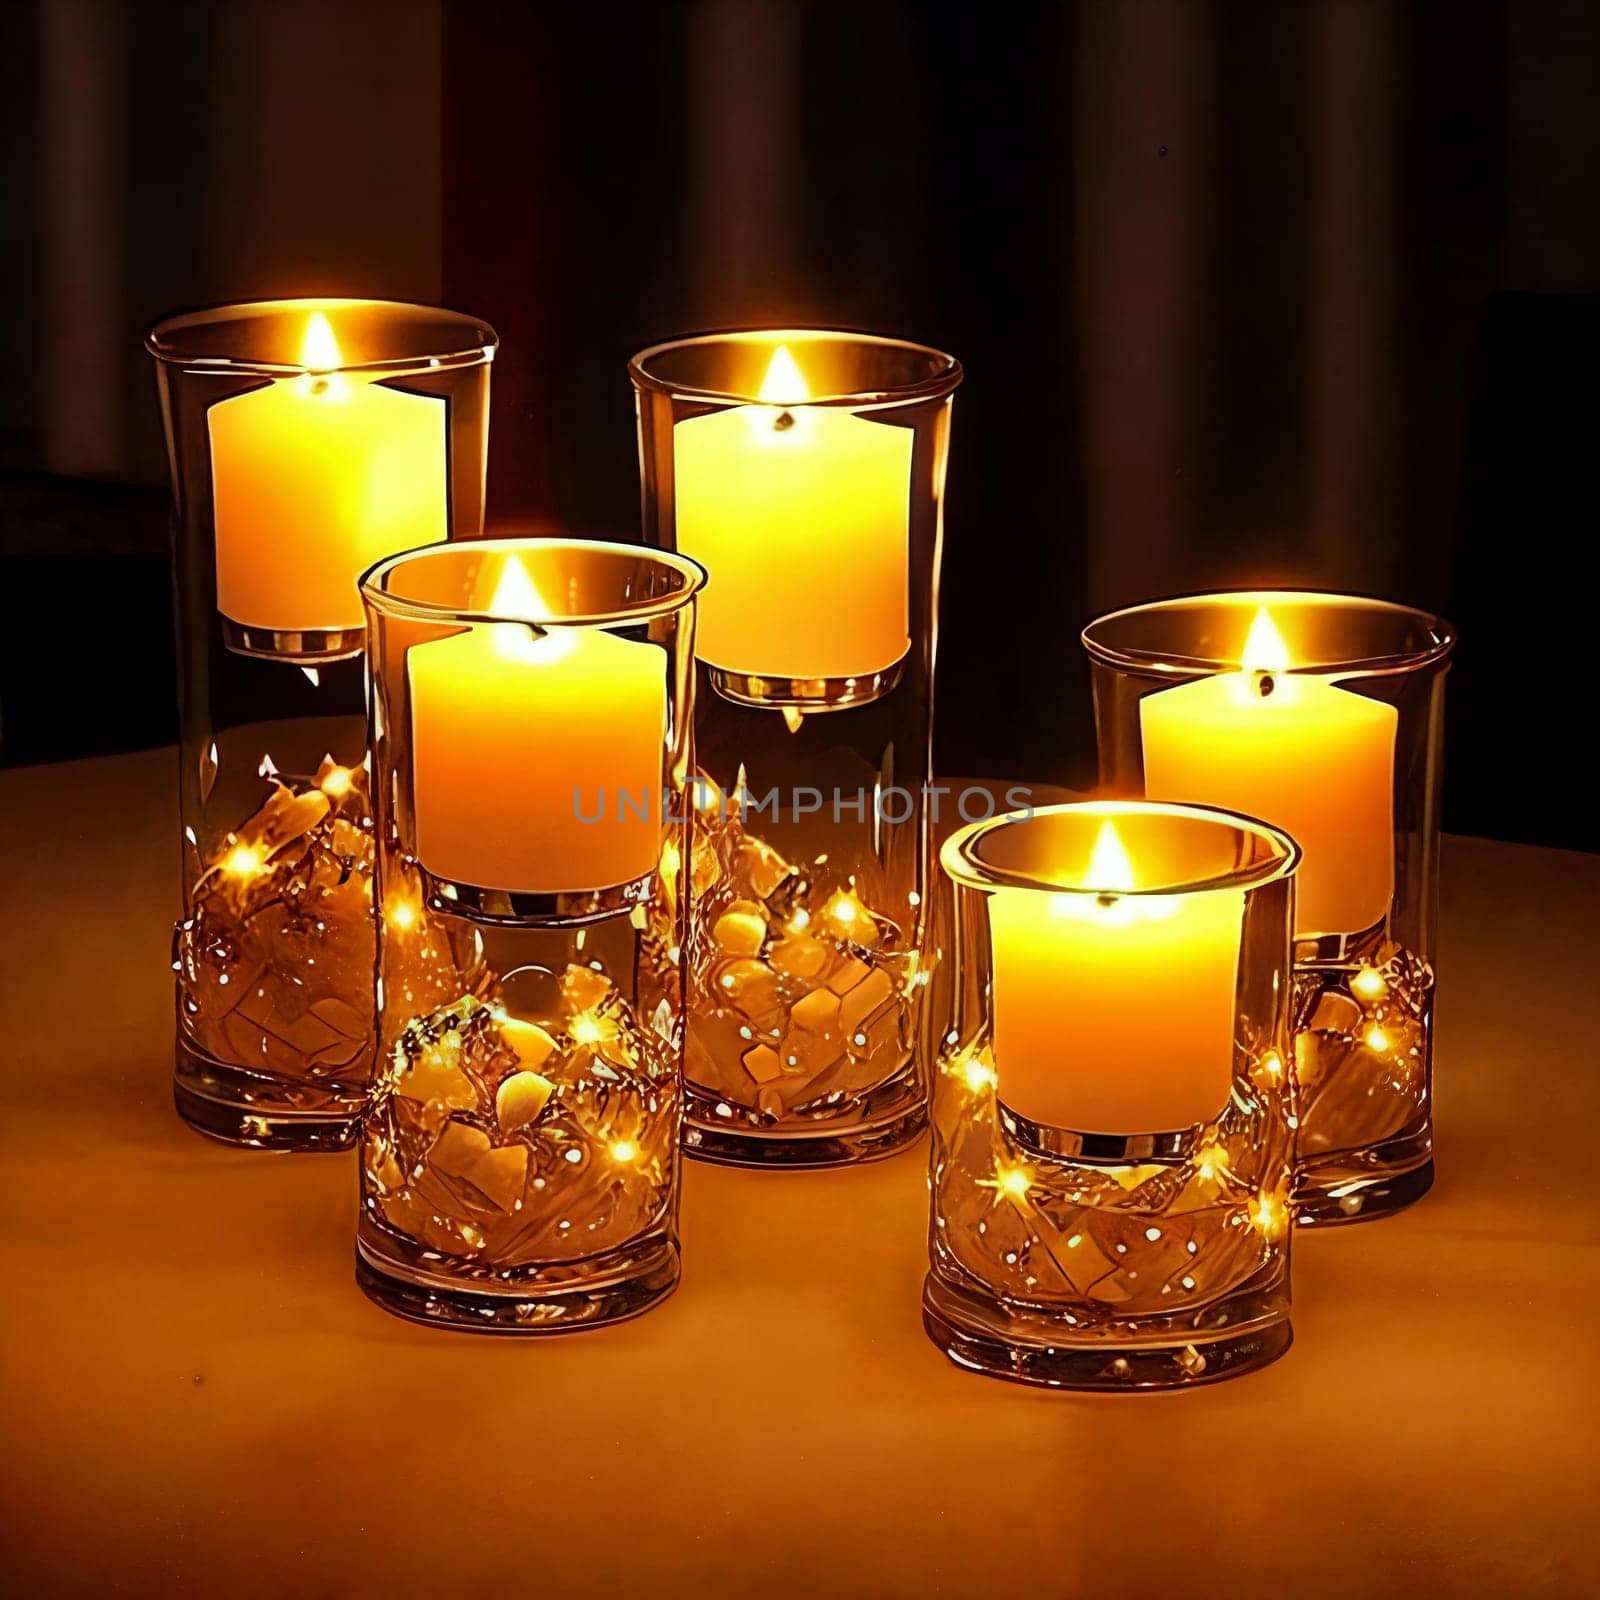 Cluster of decorative glass candle holders reflecting the warm glow of flickering candles. Interplay of light and glass textures to create a captivating image of ambiance and serenity